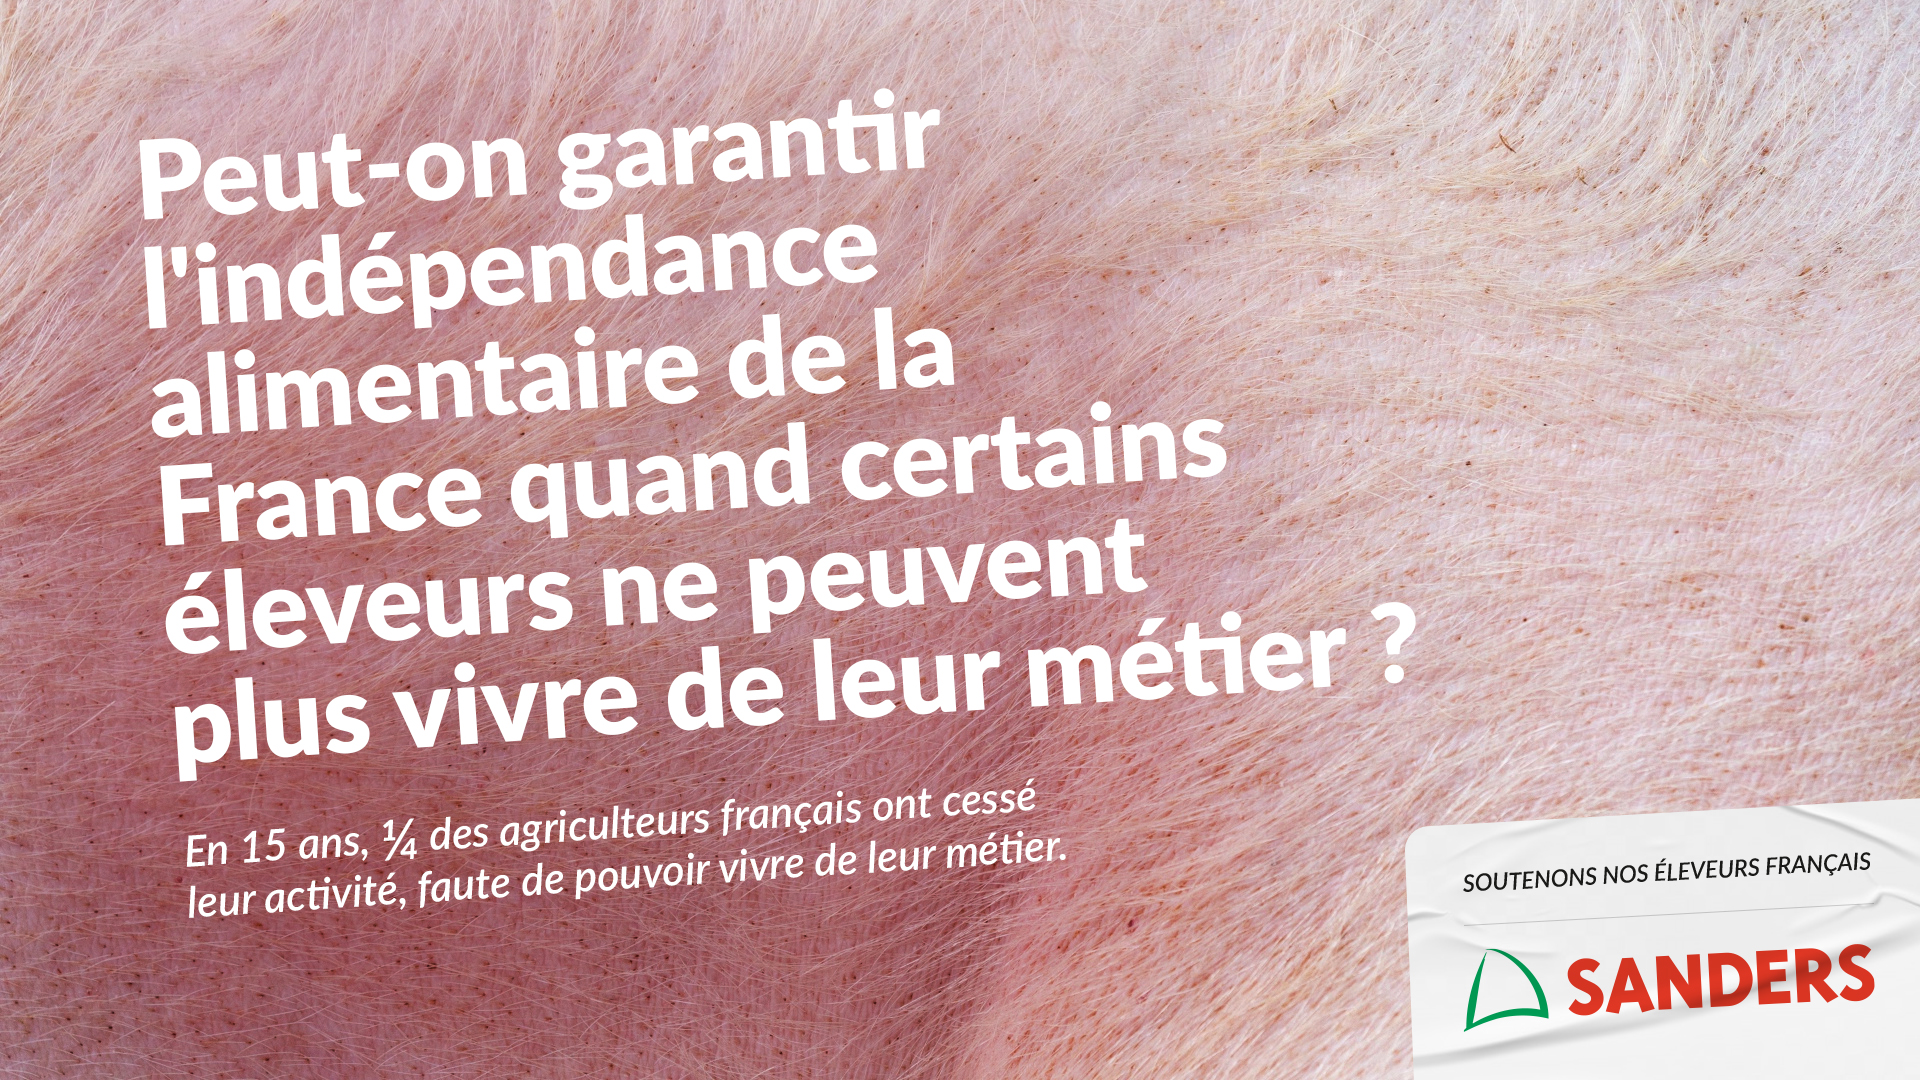 Independance Alimentaire